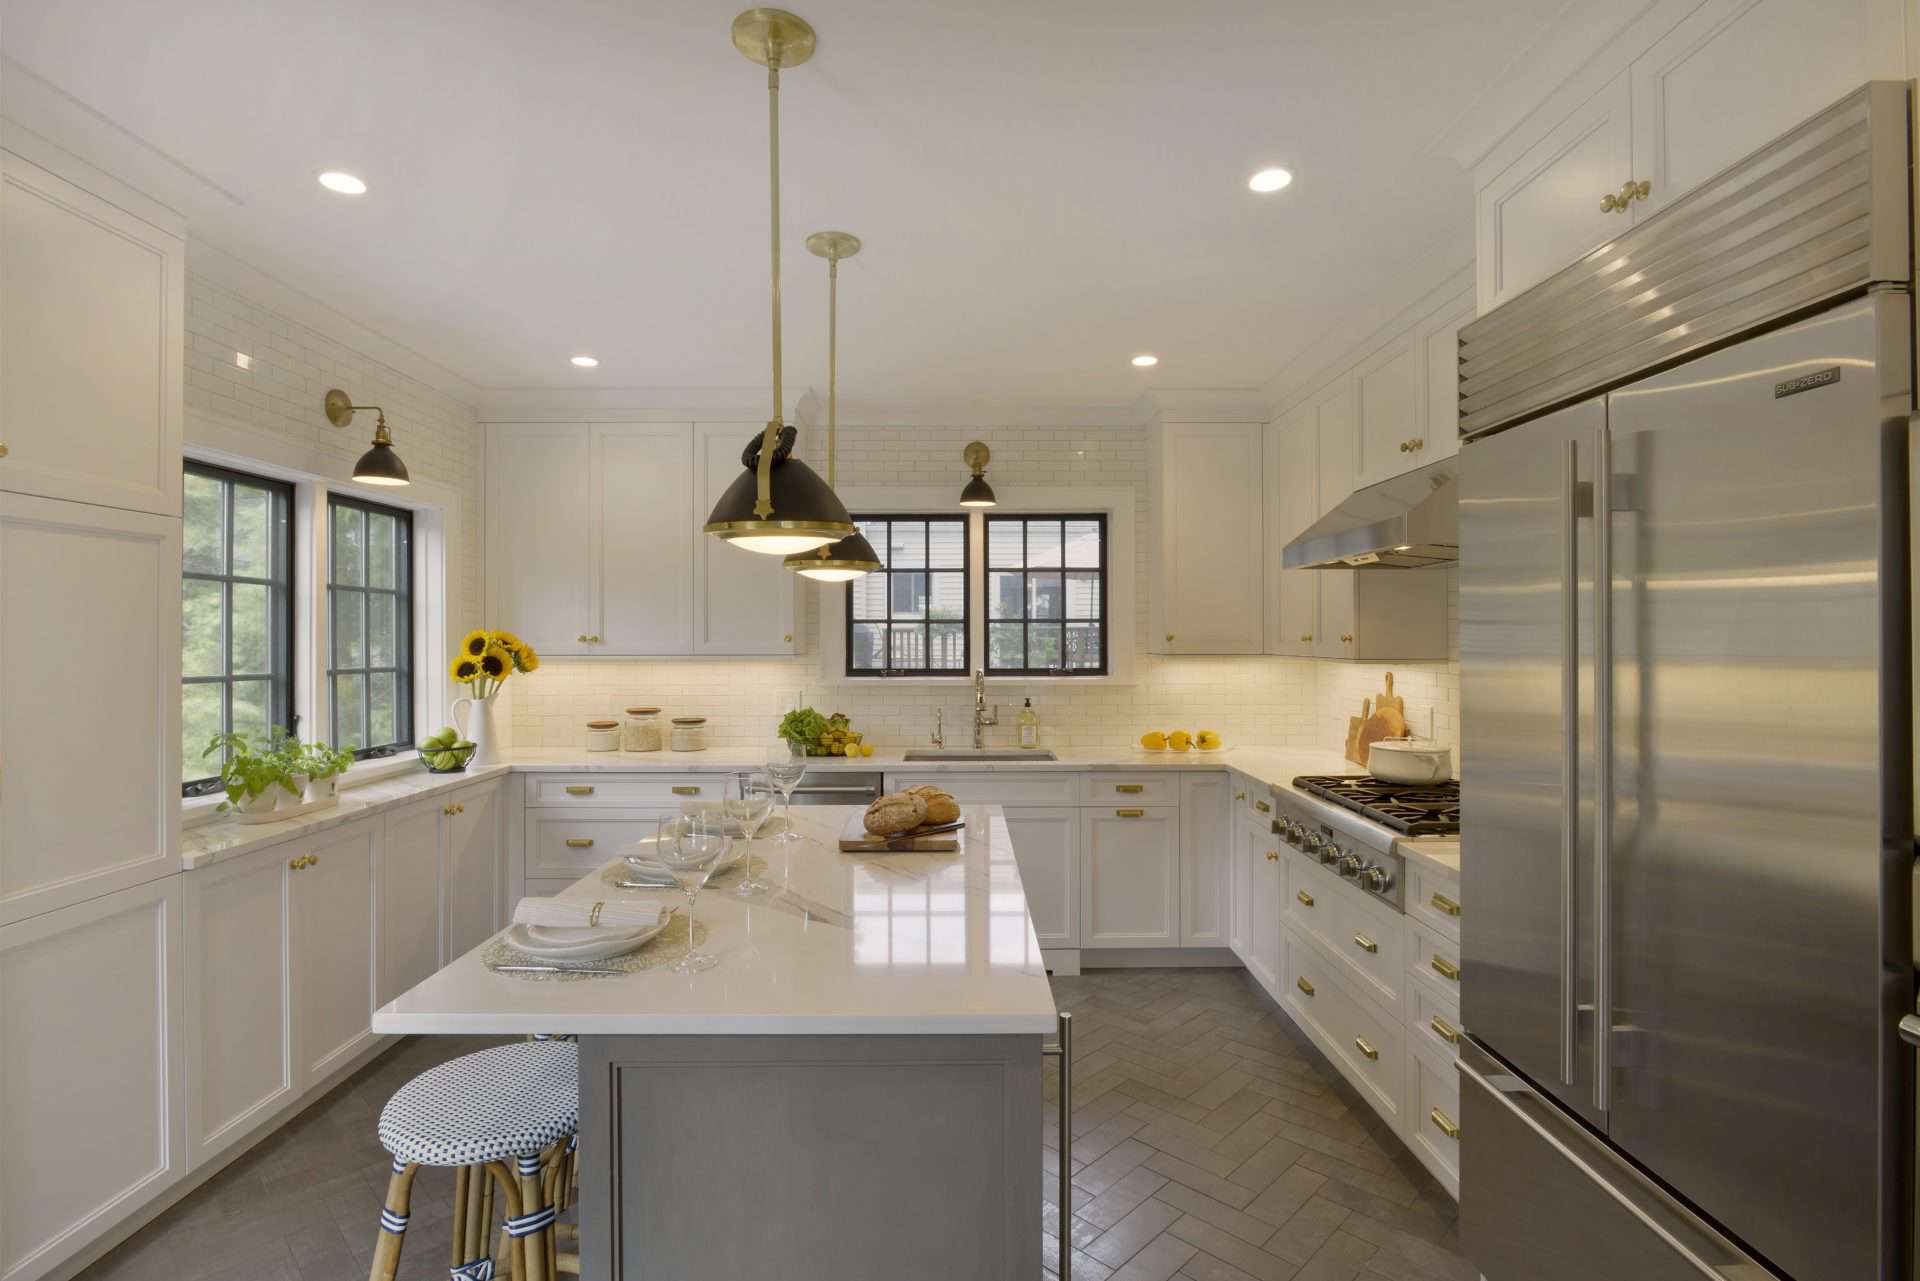 Mount Kisco Kitchen features white Caesarstone topped white NAC cabinetry, herringbone floor tile. and black and brass accents.